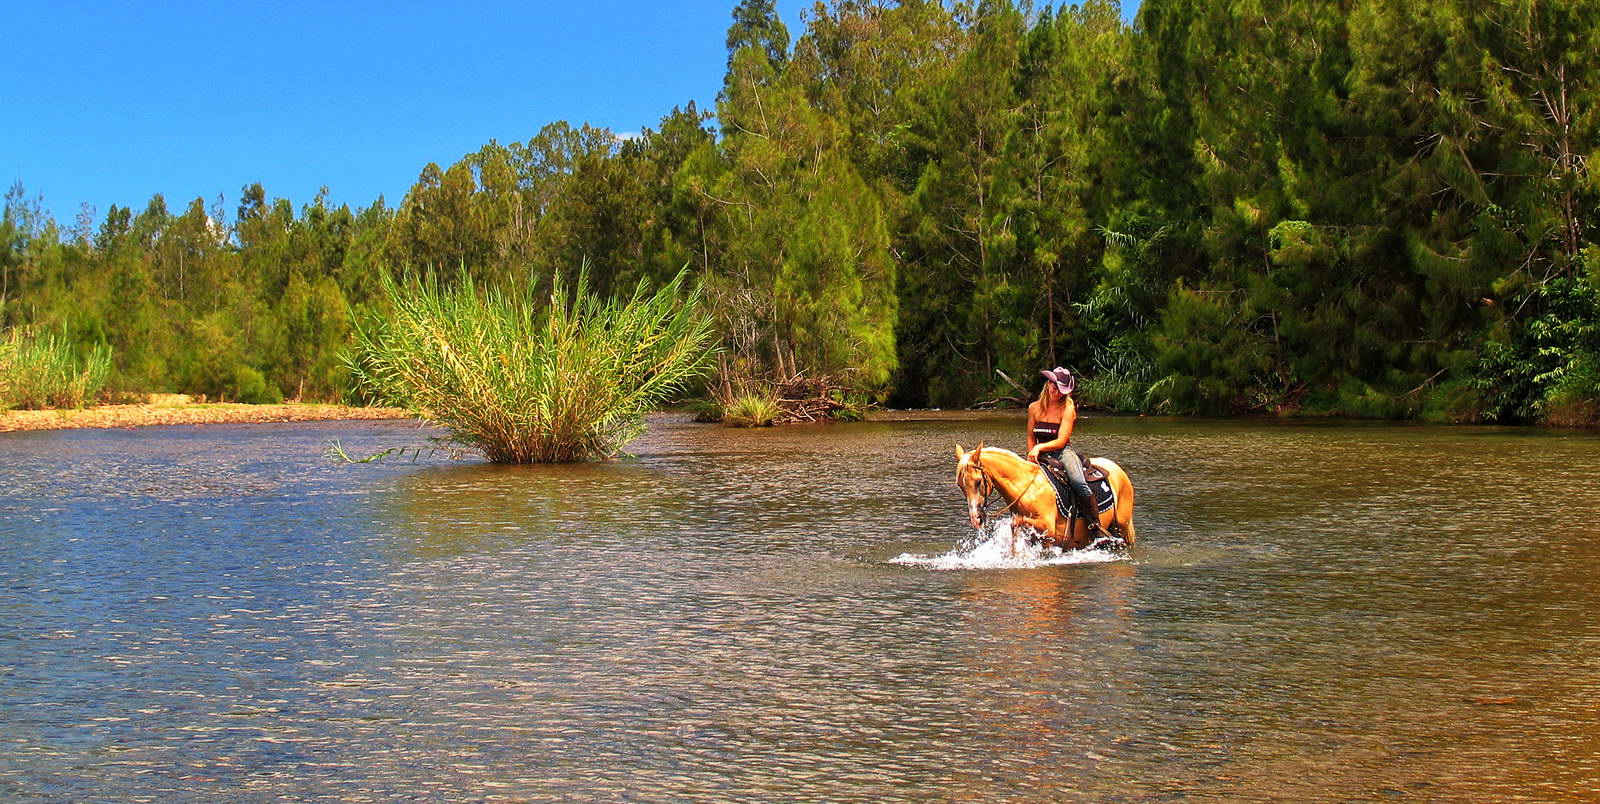 Rocket Travel Guide to Horseback Riding in New Caledonia